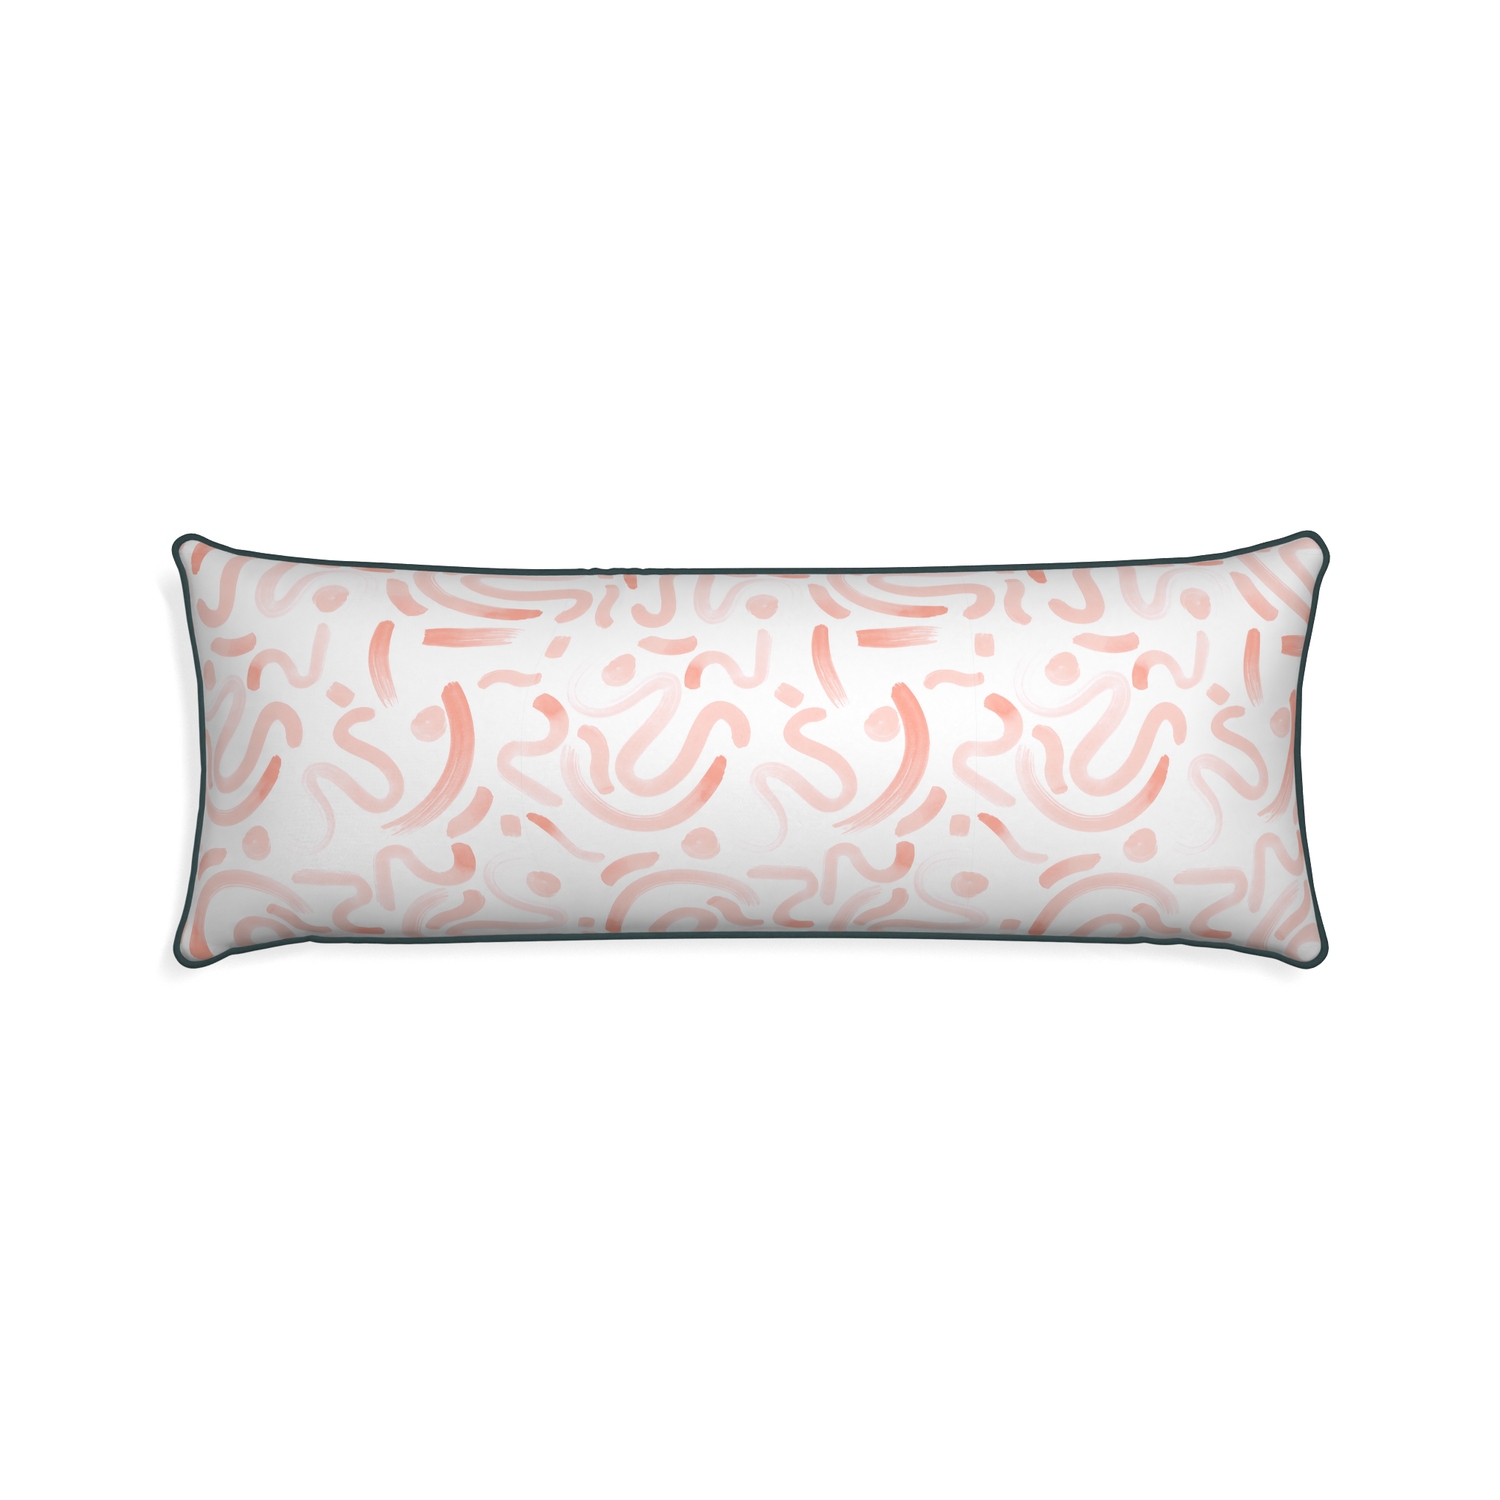 Xl-lumbar hockney pink custom pink graphicpillow with p piping on white background